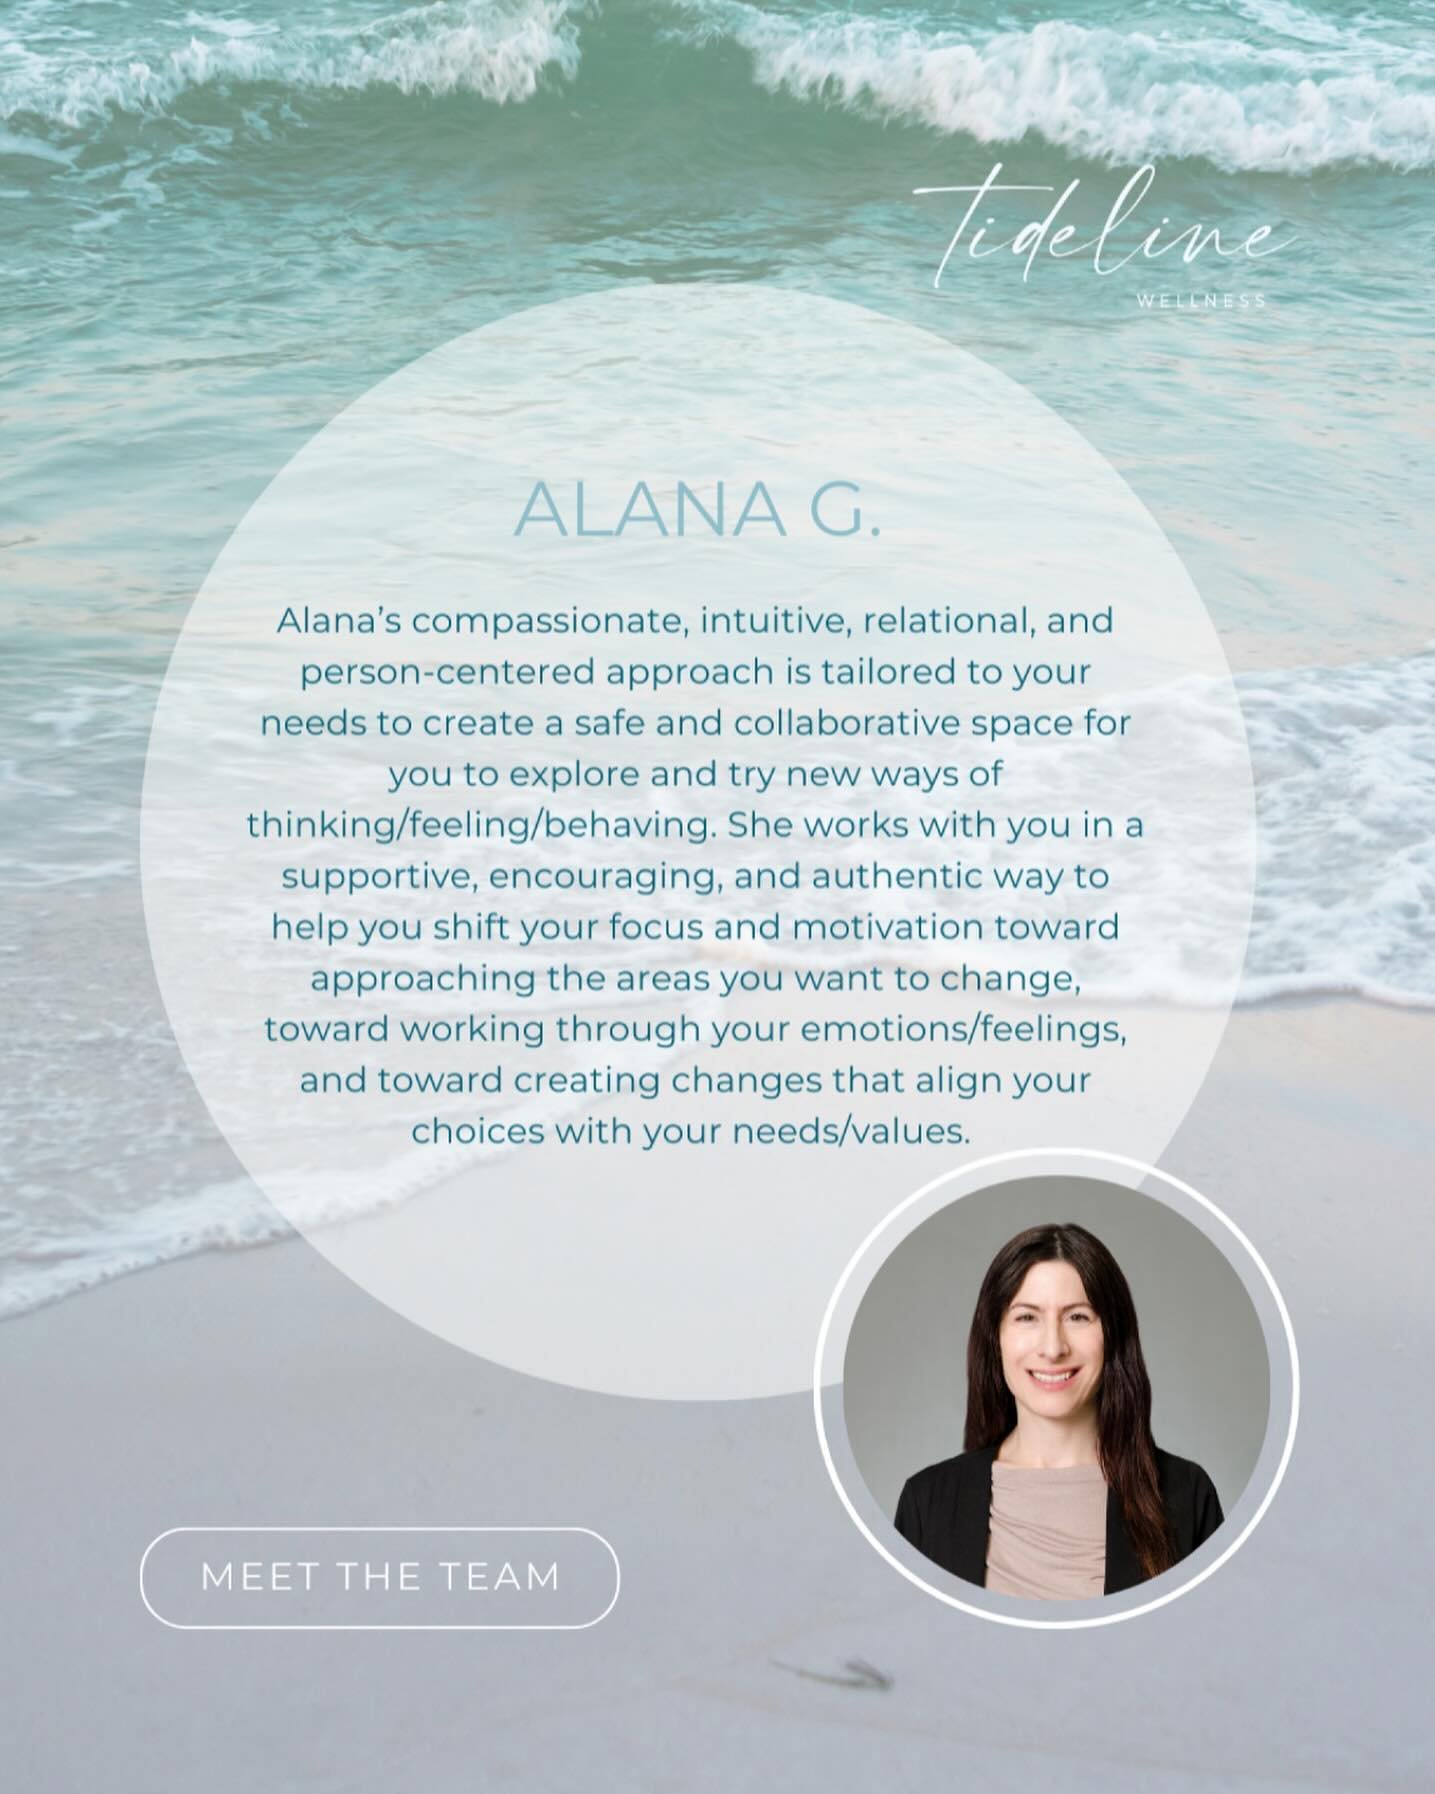 Meet Alana Gillchrist, a Registered Professional Counsellor ready to guide you on your journey of self-discovery and growth! 🌟

With a tailored, person-centered approach, Alana creates a safe and collaborative space for you to explore new ways of th